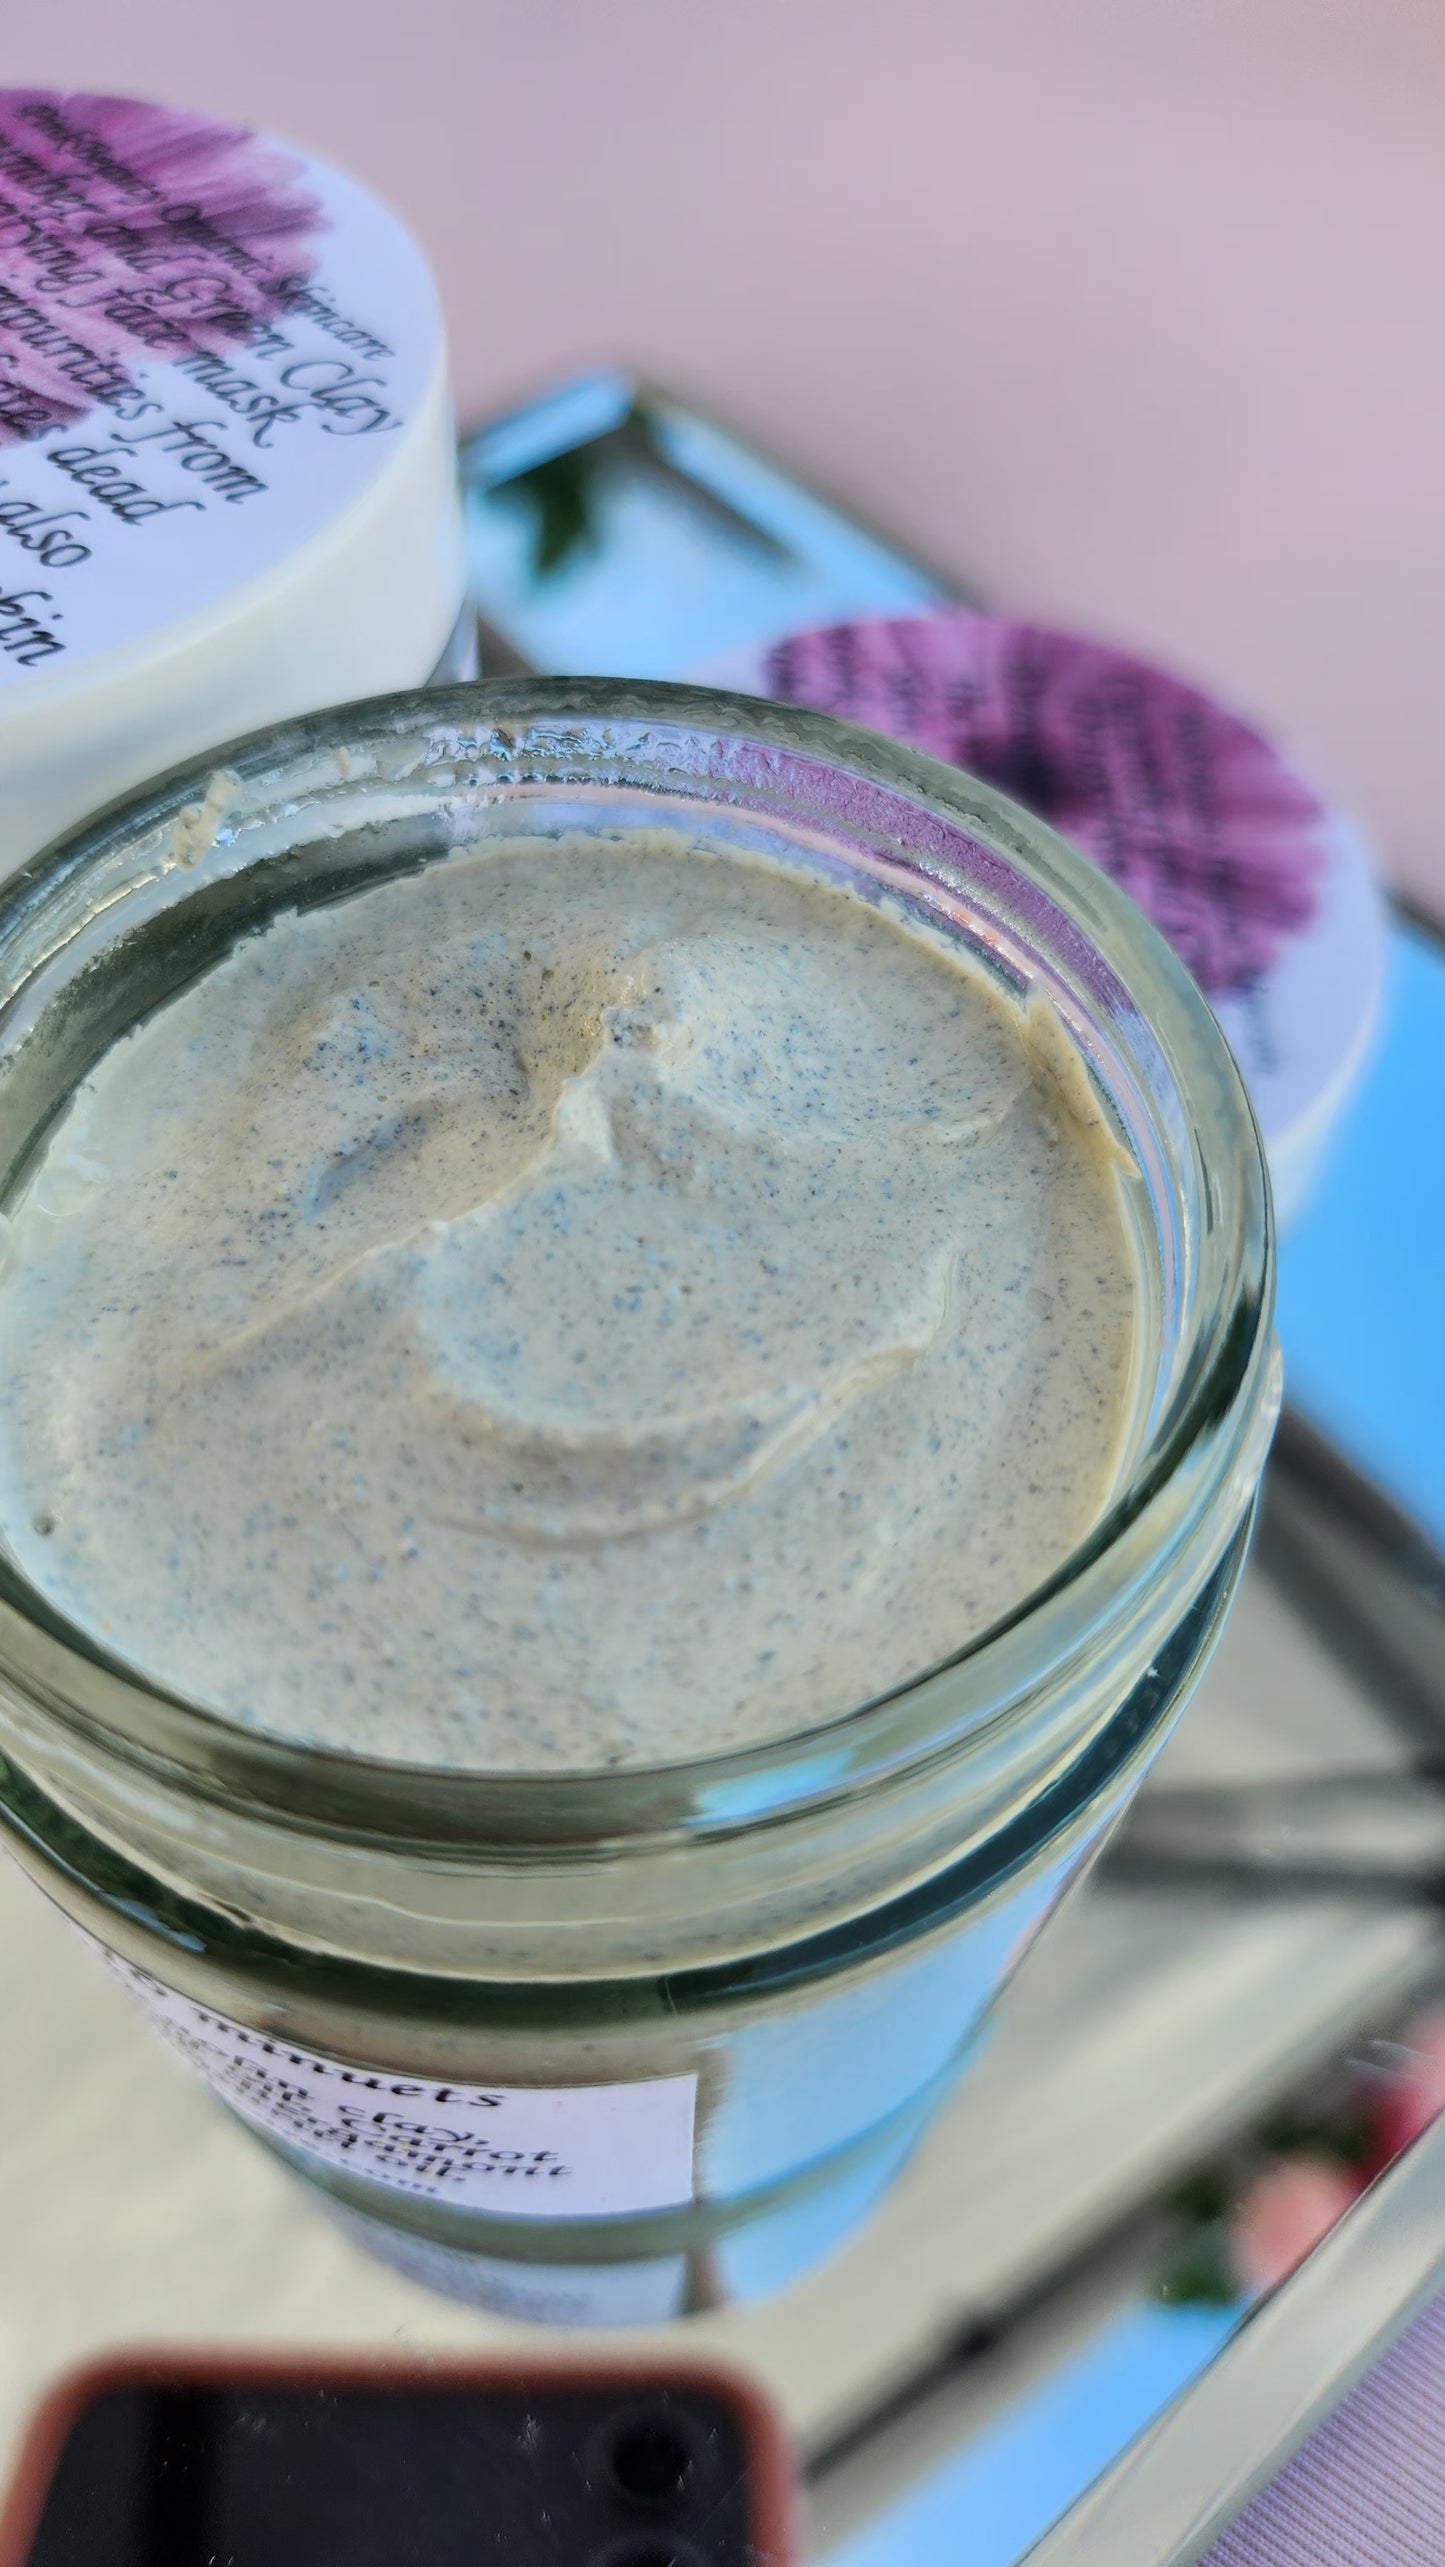 Cucumber and Green Clay face mask